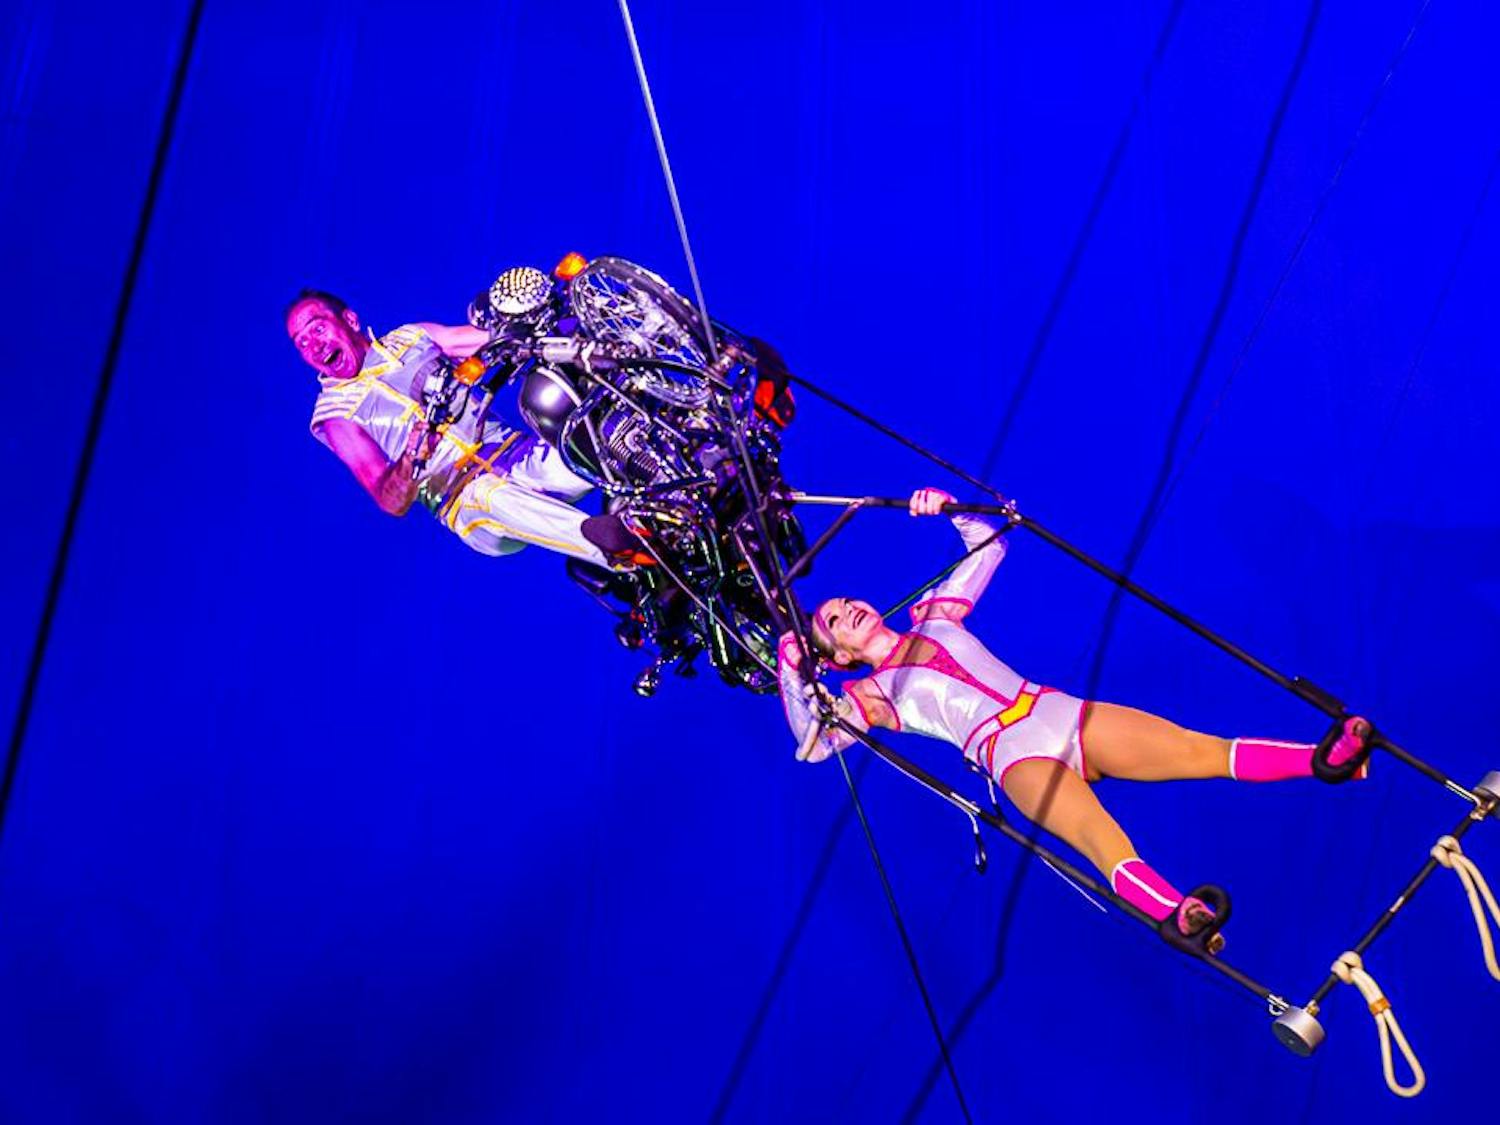 Alex Petrov (left) beams while turning his motorcycle and daughter Sophia Petrov (right) upside down during the finale of the CIRCUS at the Fair on Oct. 18, 2023. The duo performs acrobatic stunts while driving a motorcycle on a wire above the ring.